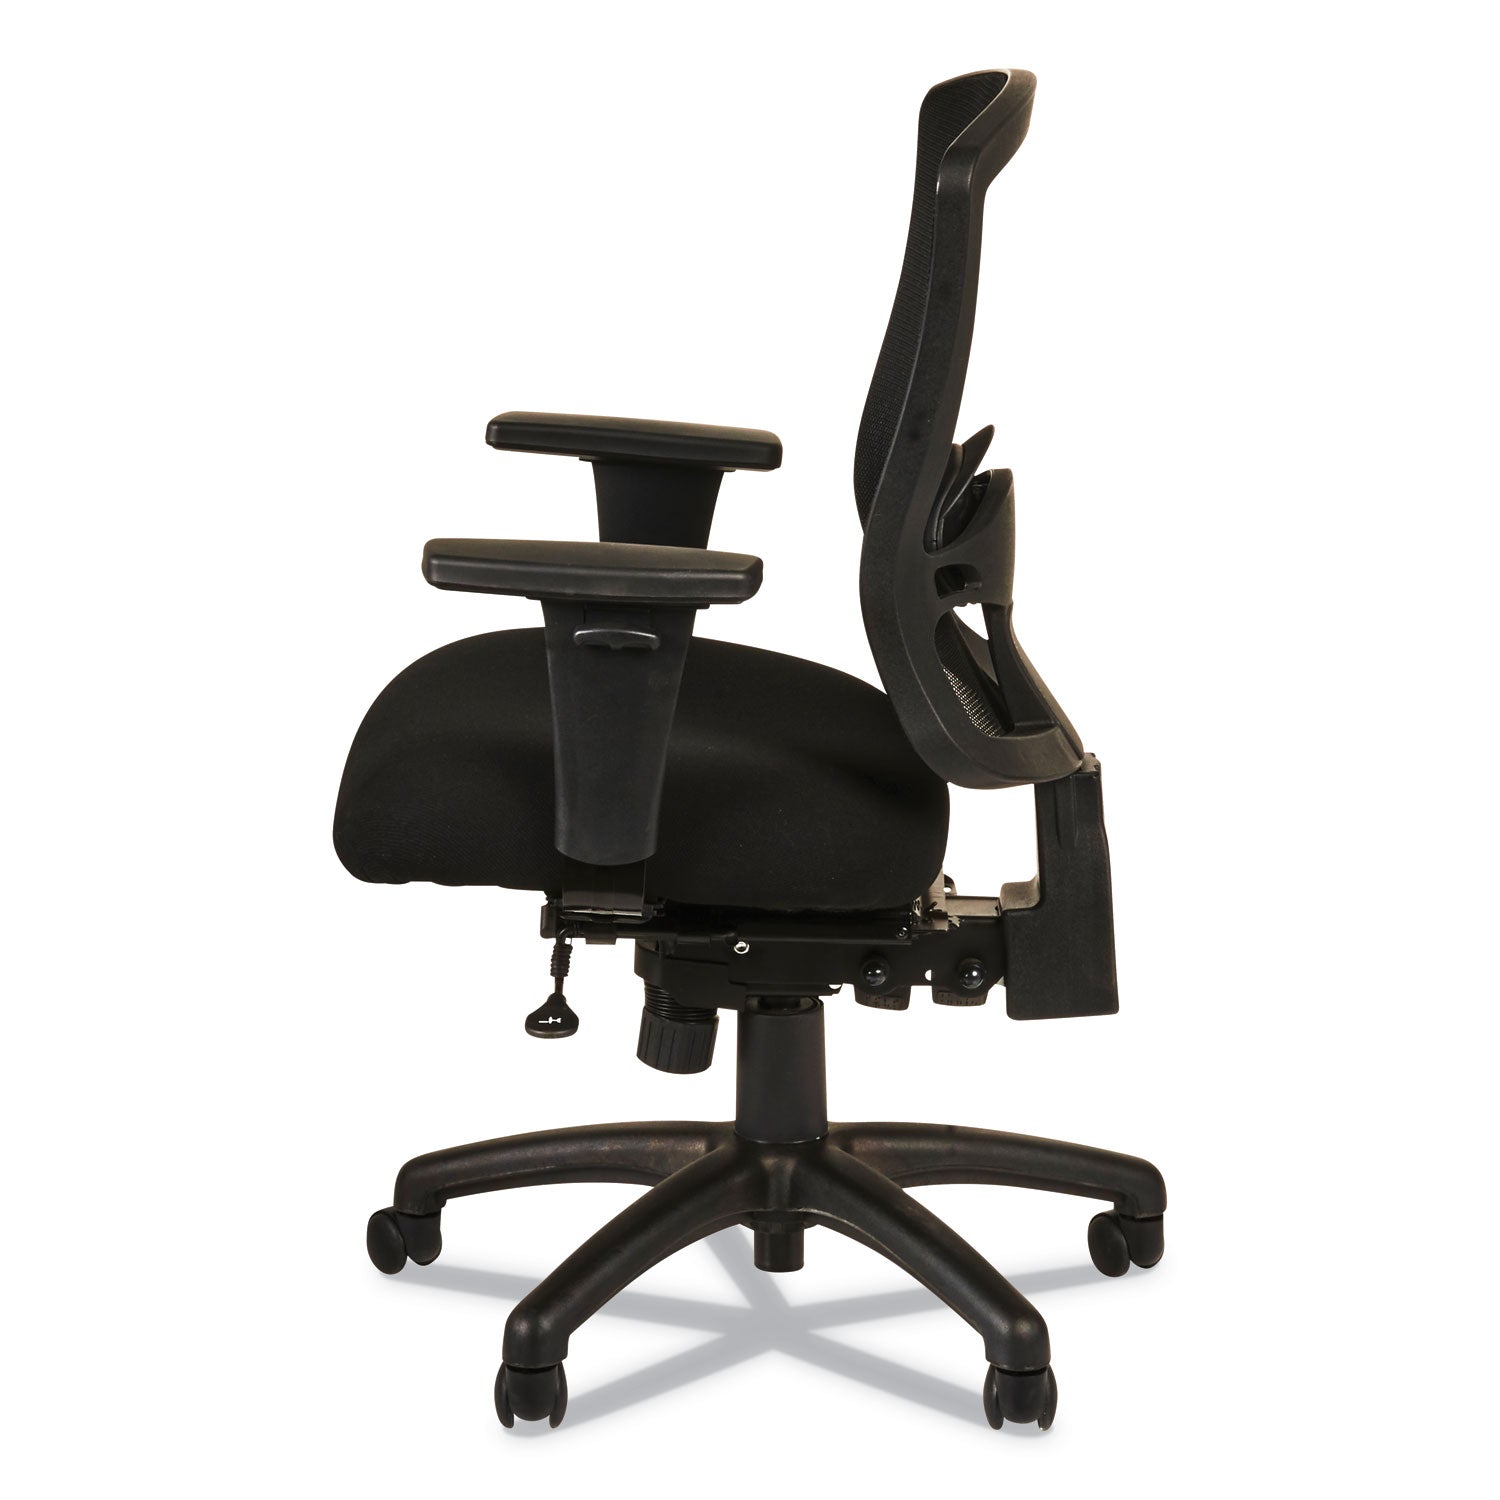 alera-etros-series-mid-back-multifunction-with-seat-slide-chair-supports-up-to-275-lb-1783-to-2145-seat-height-black_aleet4217 - 6